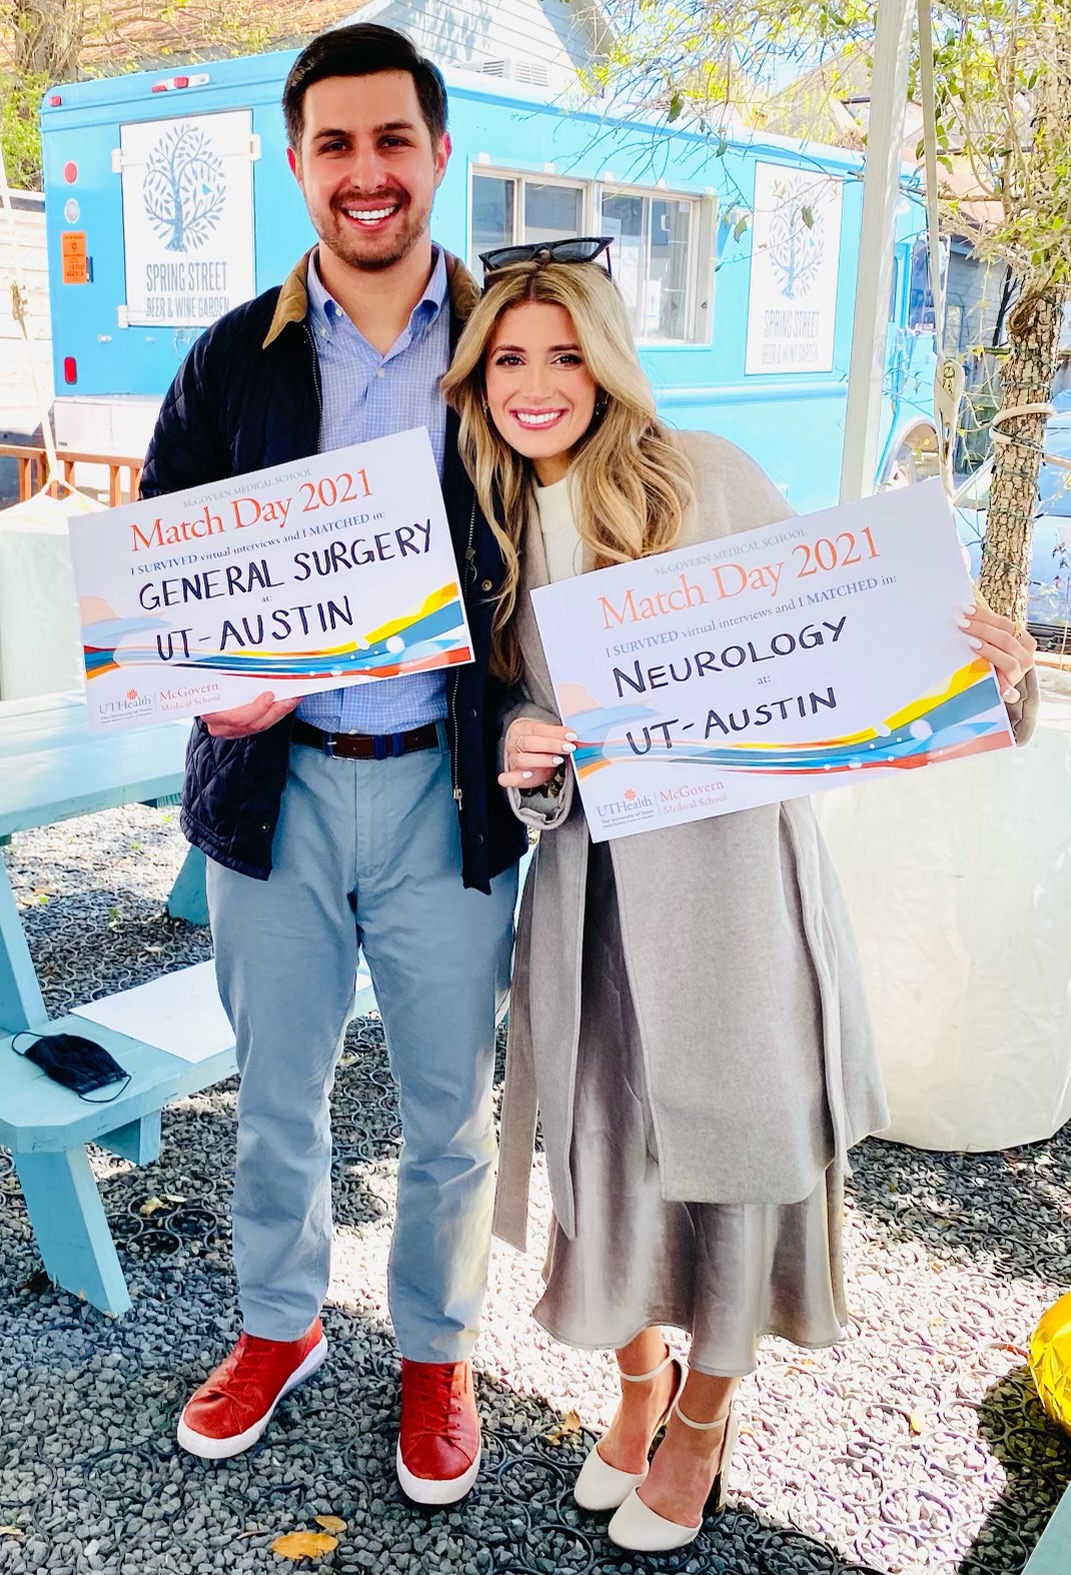 Annika Medhus, 26, and John-Paul Bach, 25, both matched to The University of Texas at Austin Dell Medical School for residencies in neurology and general surgery, respectively. (Photo by Annika Medhus and John-Paul Bach)